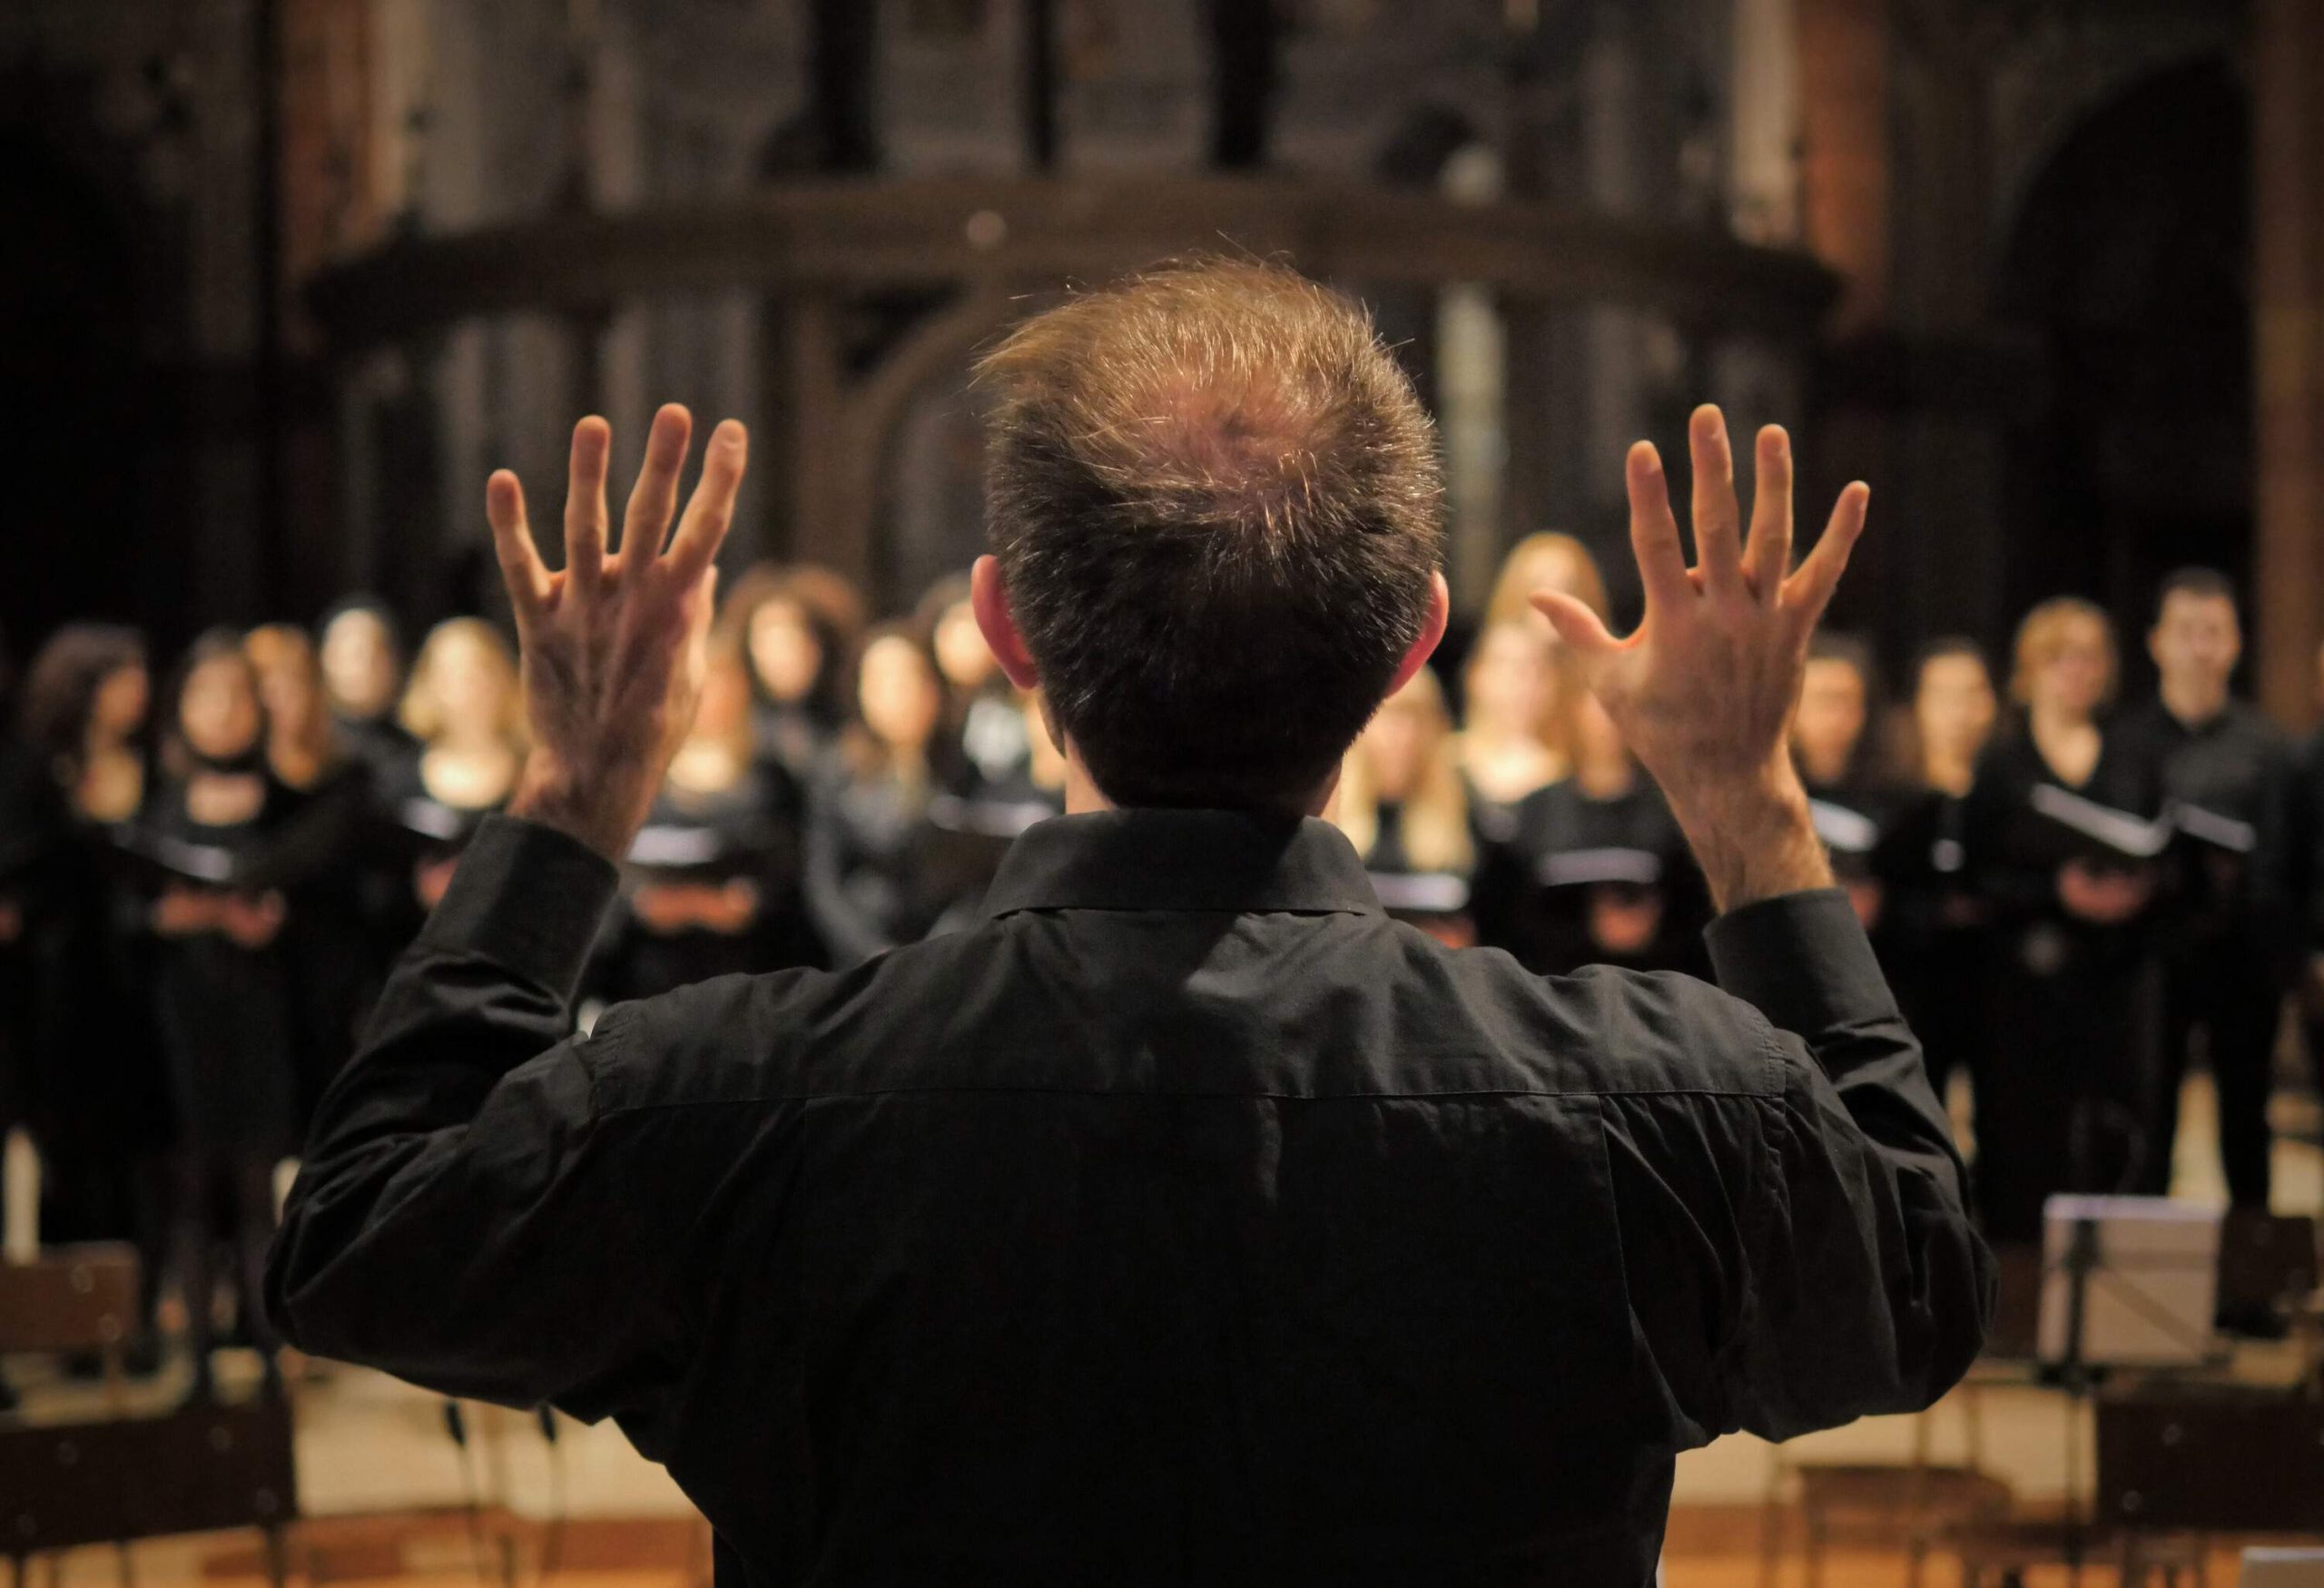 A choirmaster with his hands up against the bokeh of a crowd.